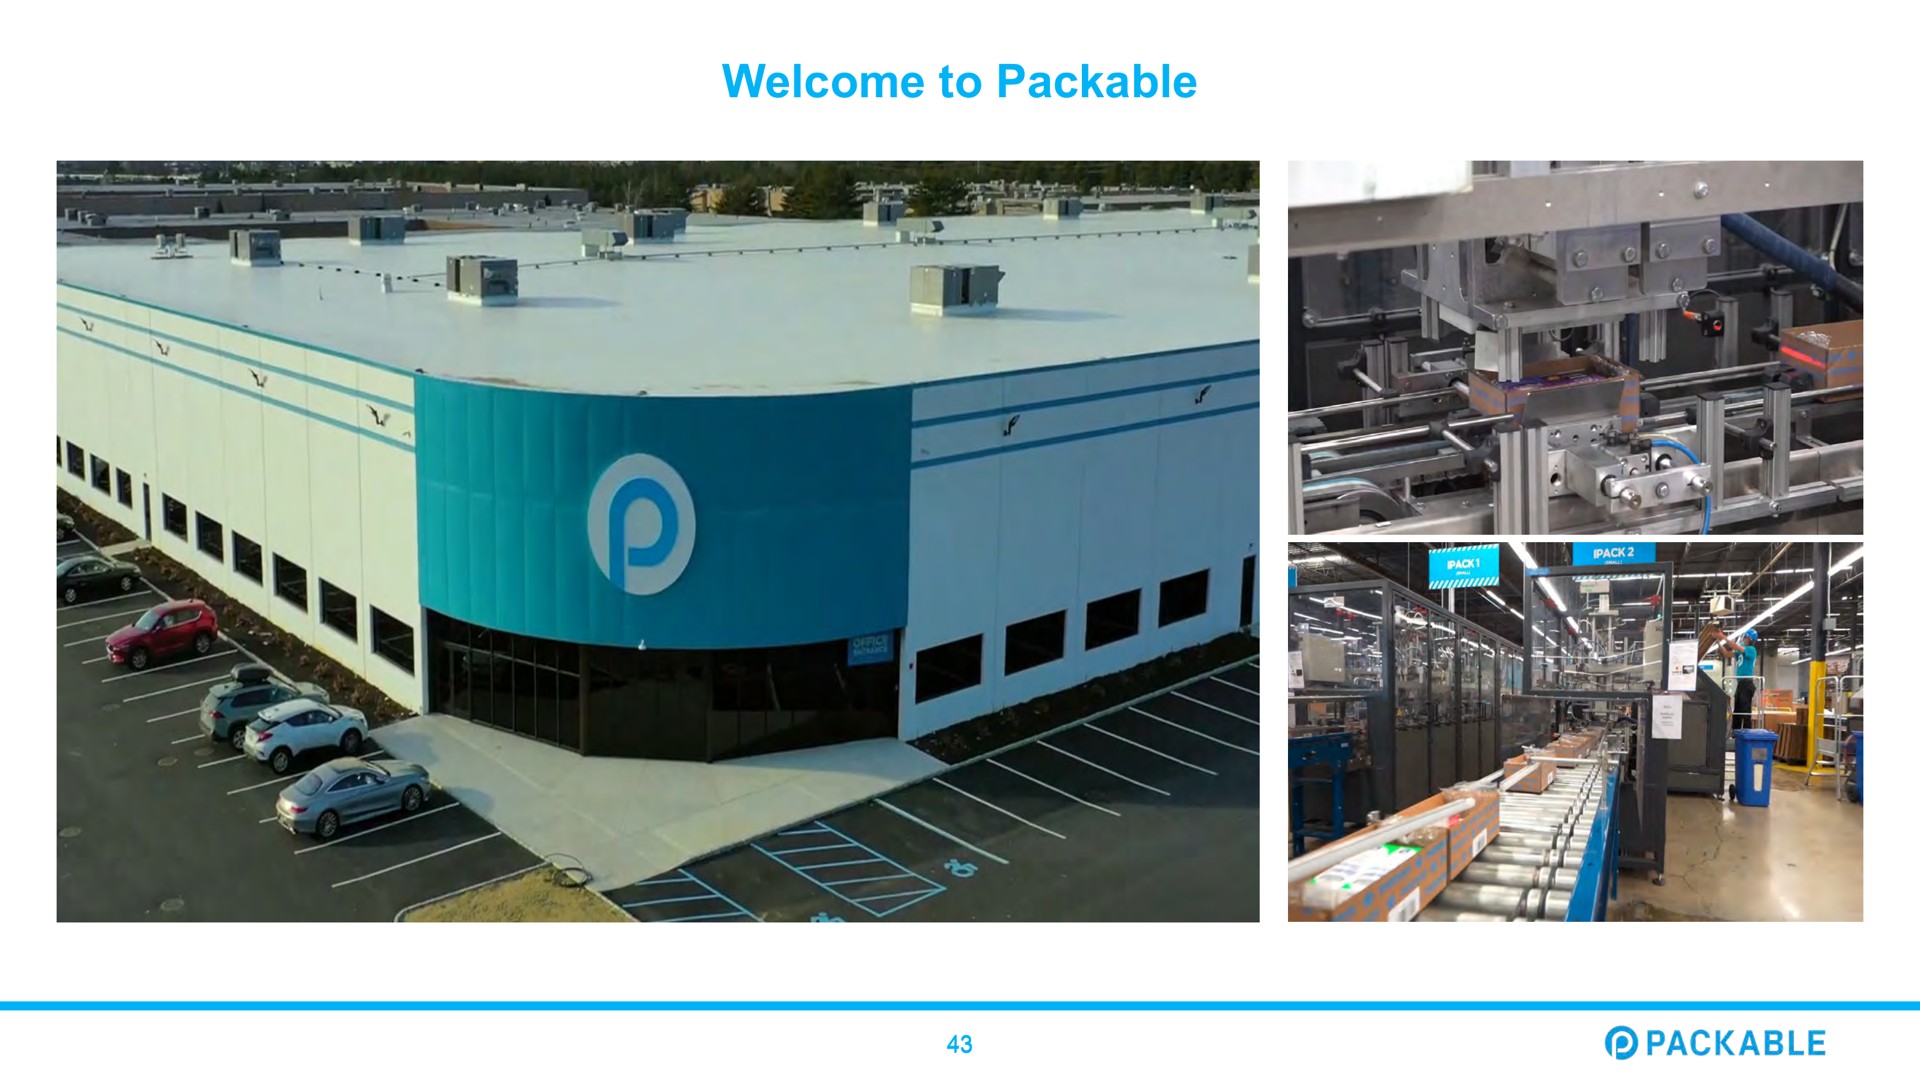 welcome to packable | Packable